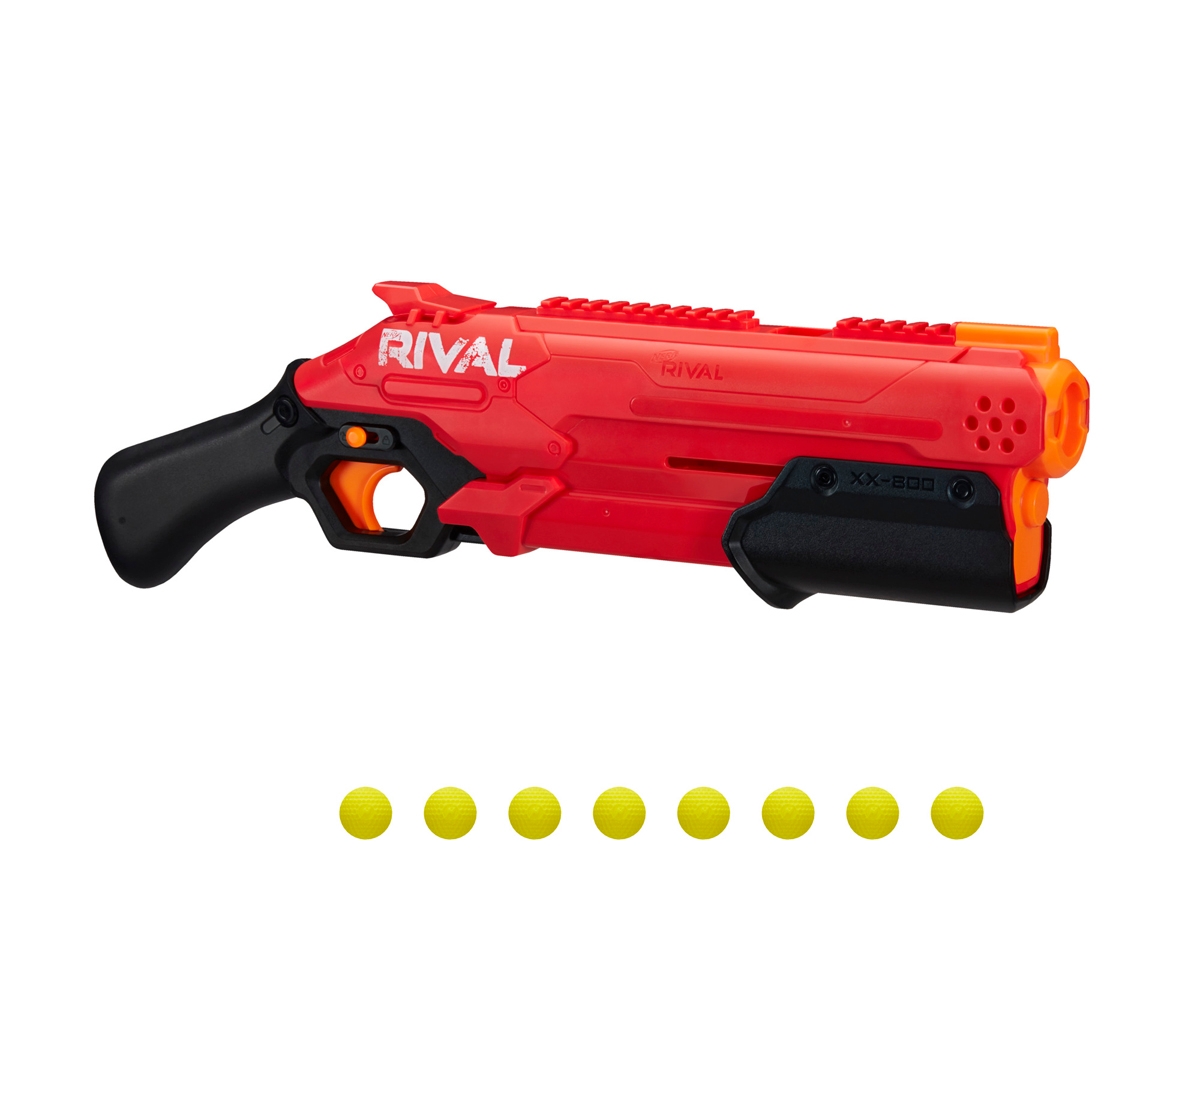 Nerf | Nerf Rival Takedown XX 800 Blaster Pump Action Breech Load for Kids 14Y+, Multicolour 0